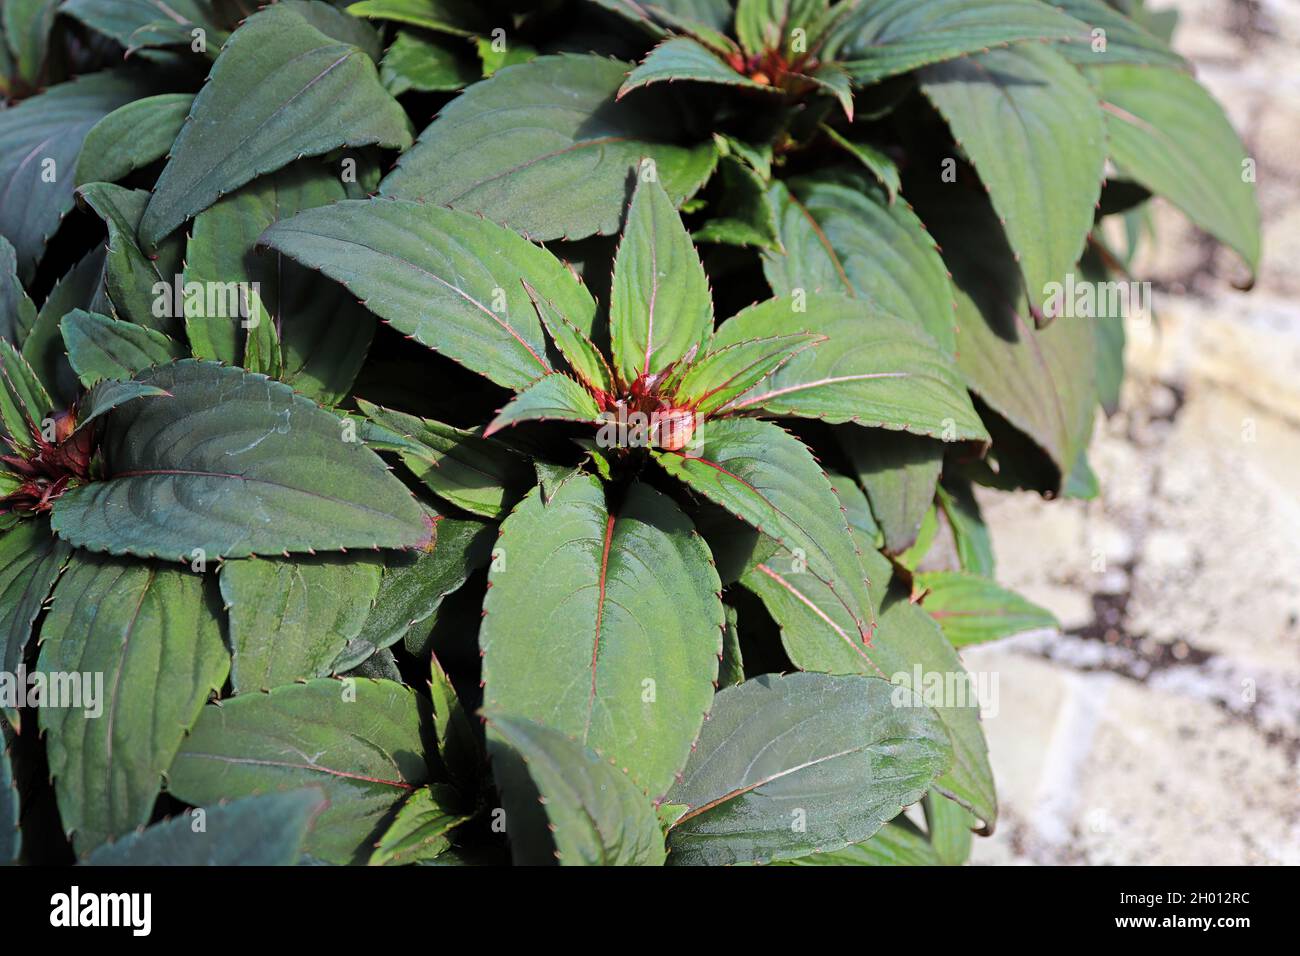 Tiny buds on inpatien flower plants about to bloom Stock Photo